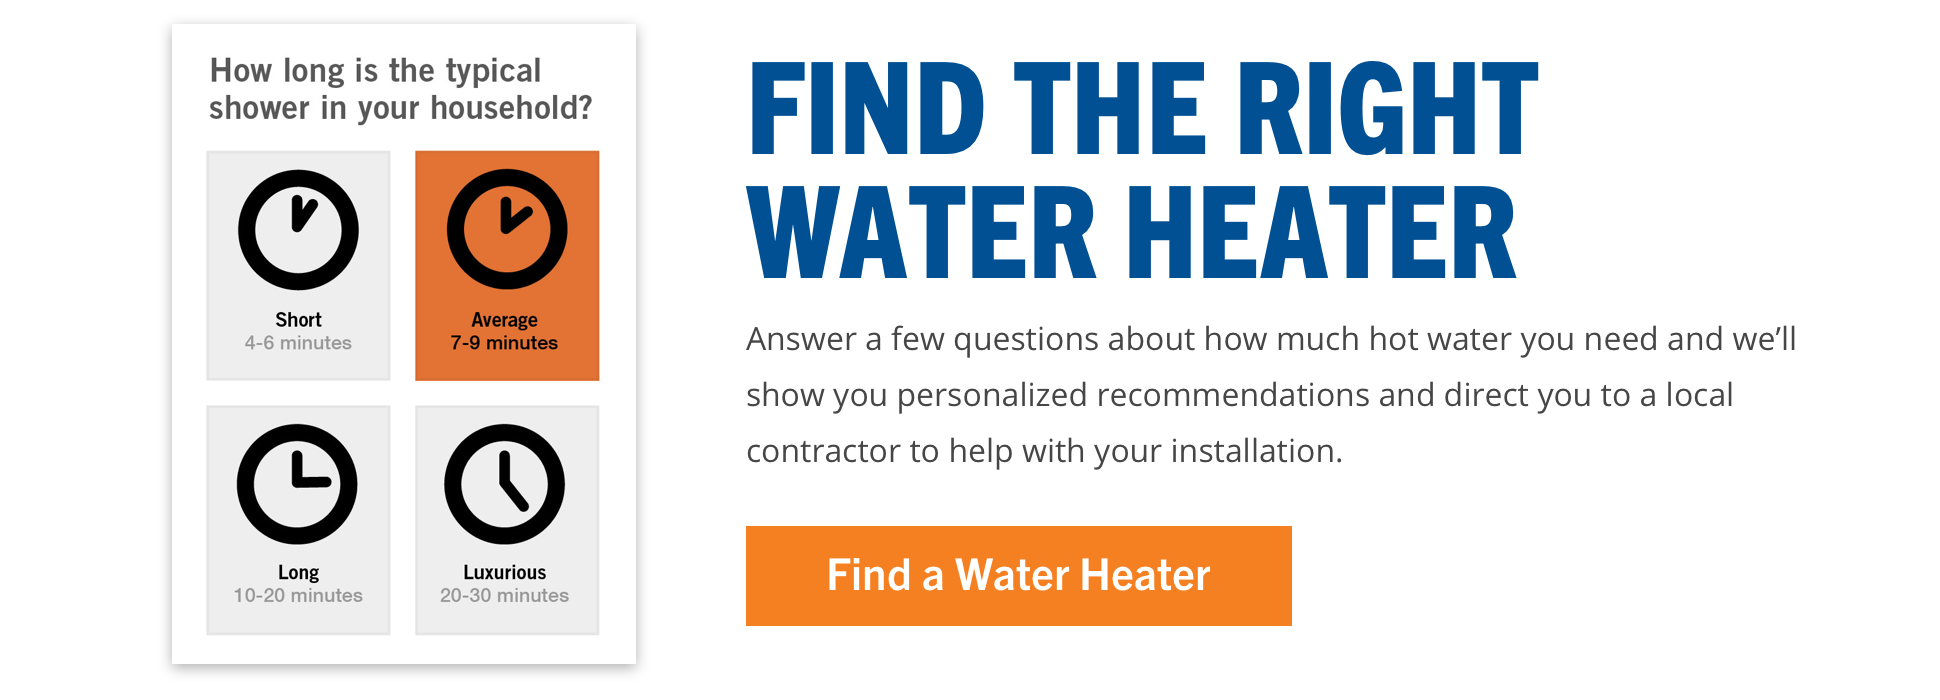 Find a residential water heater